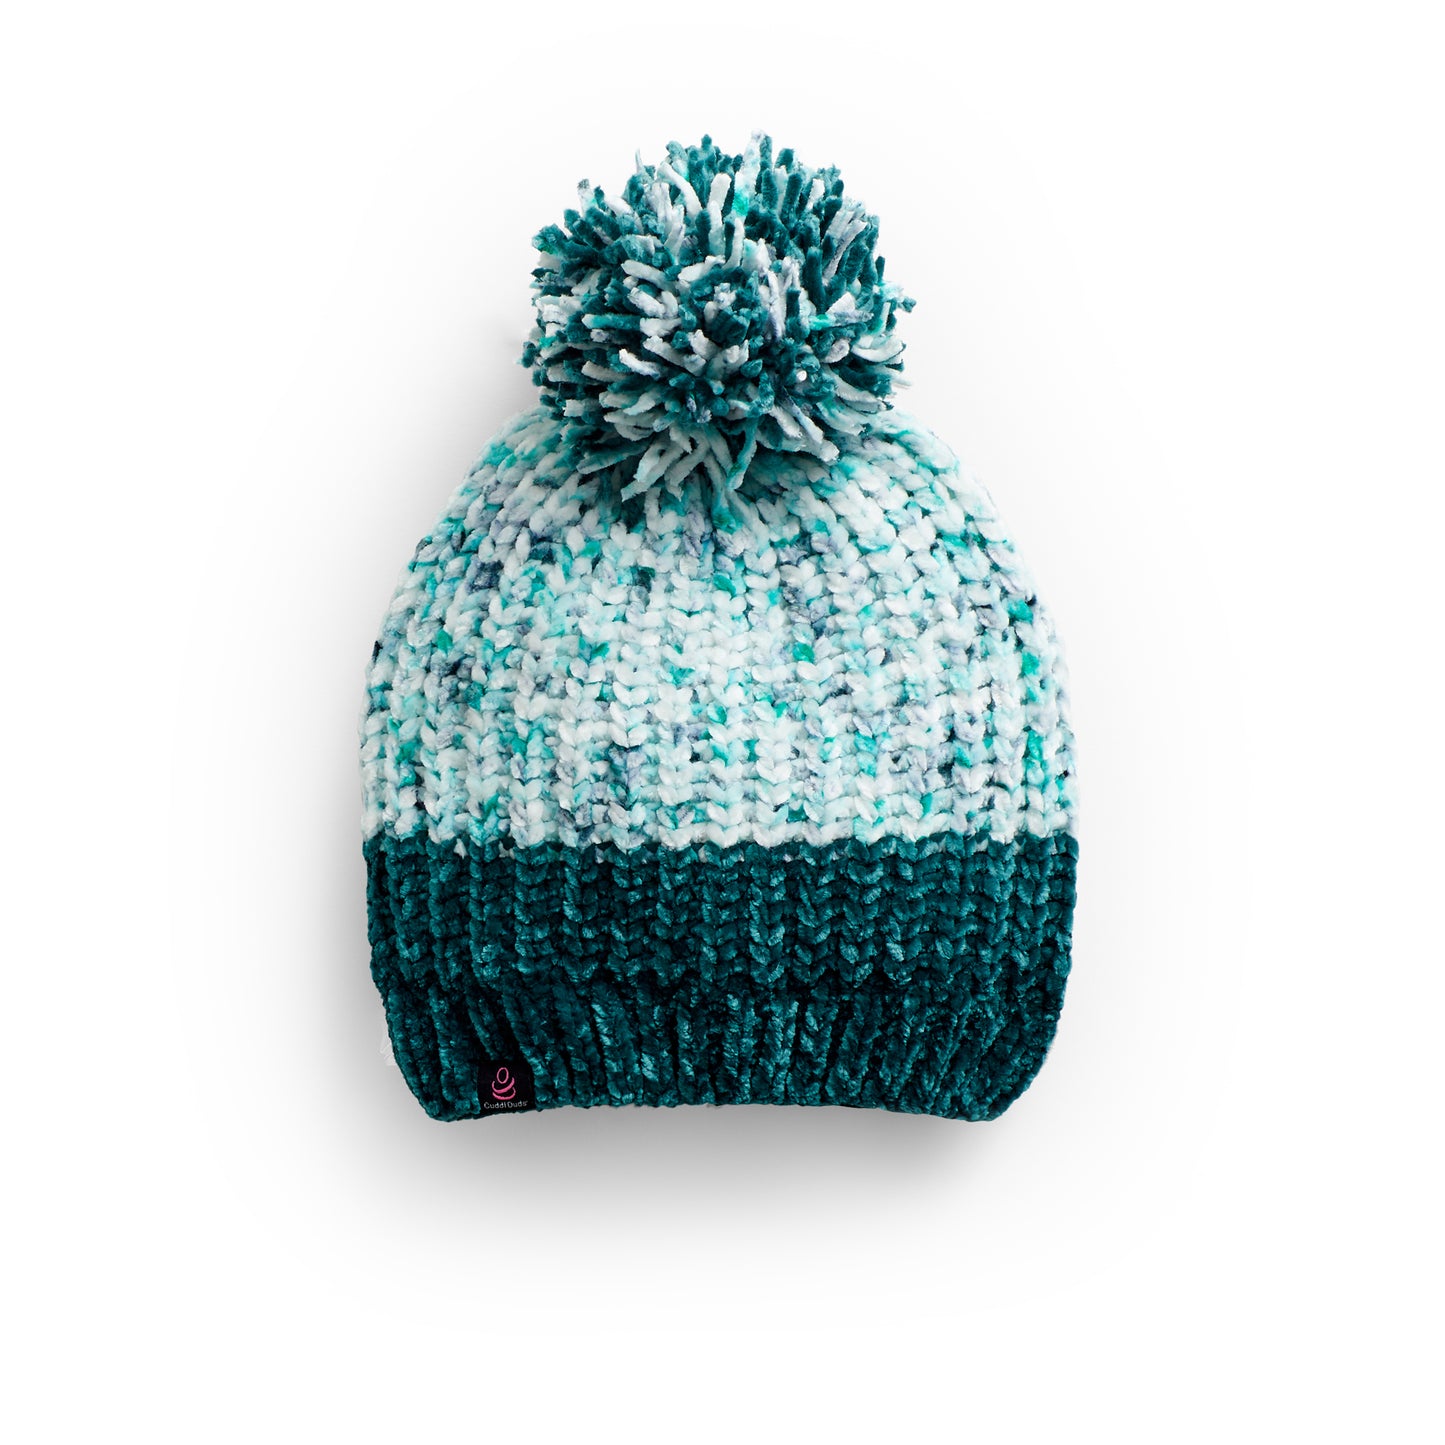 Teal Multi;@A chenille teal hat